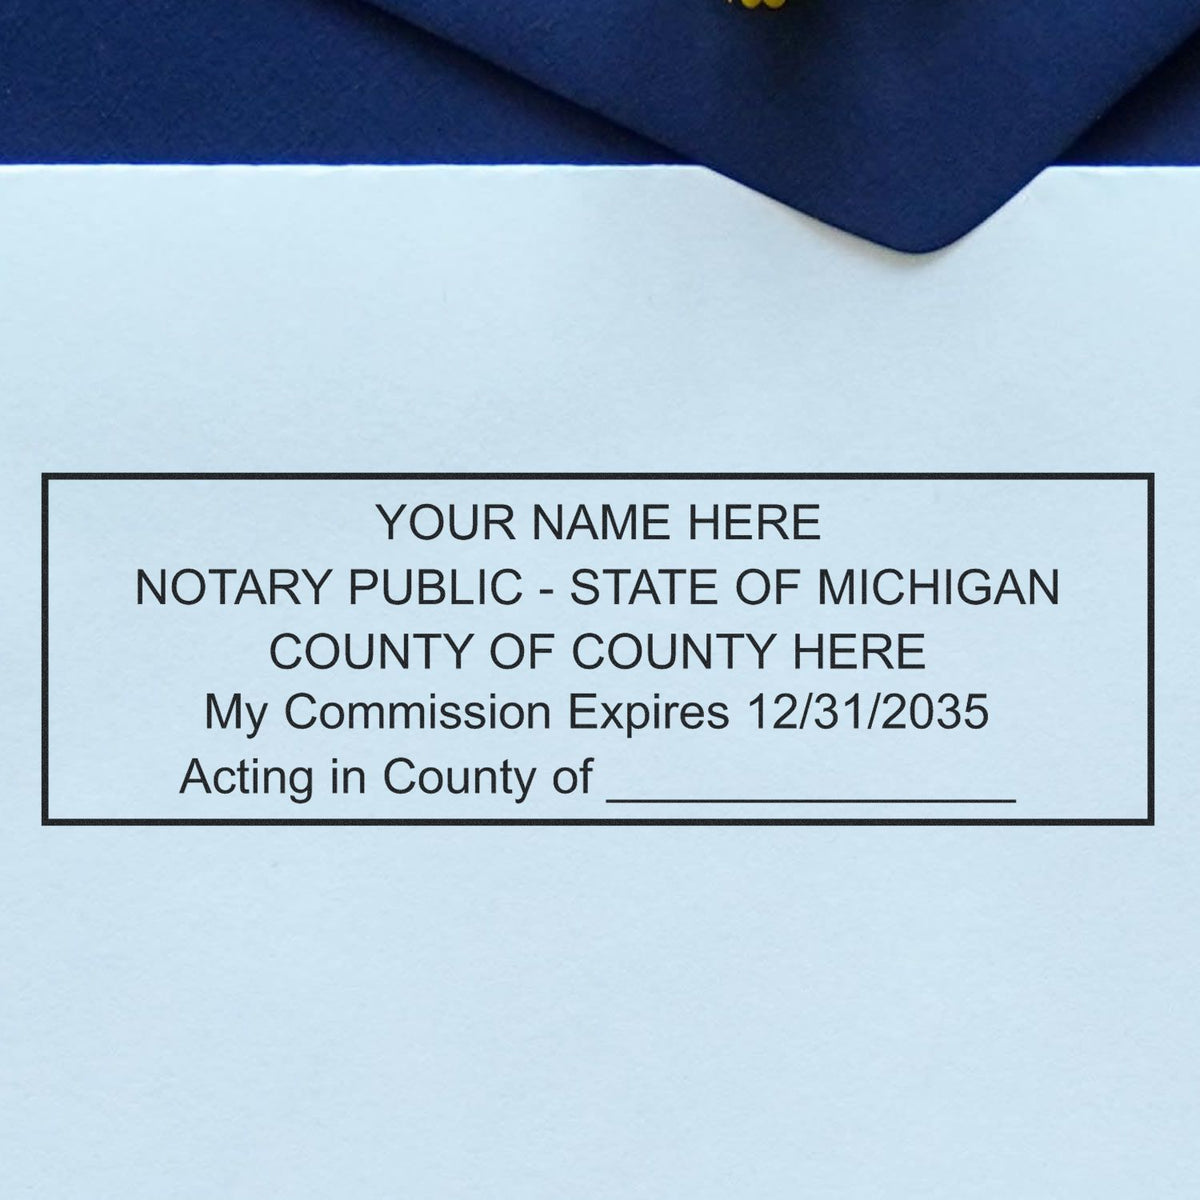 This paper is stamped with a sample imprint of the Super Slim Michigan Notary Public Stamp, signifying its quality and reliability.